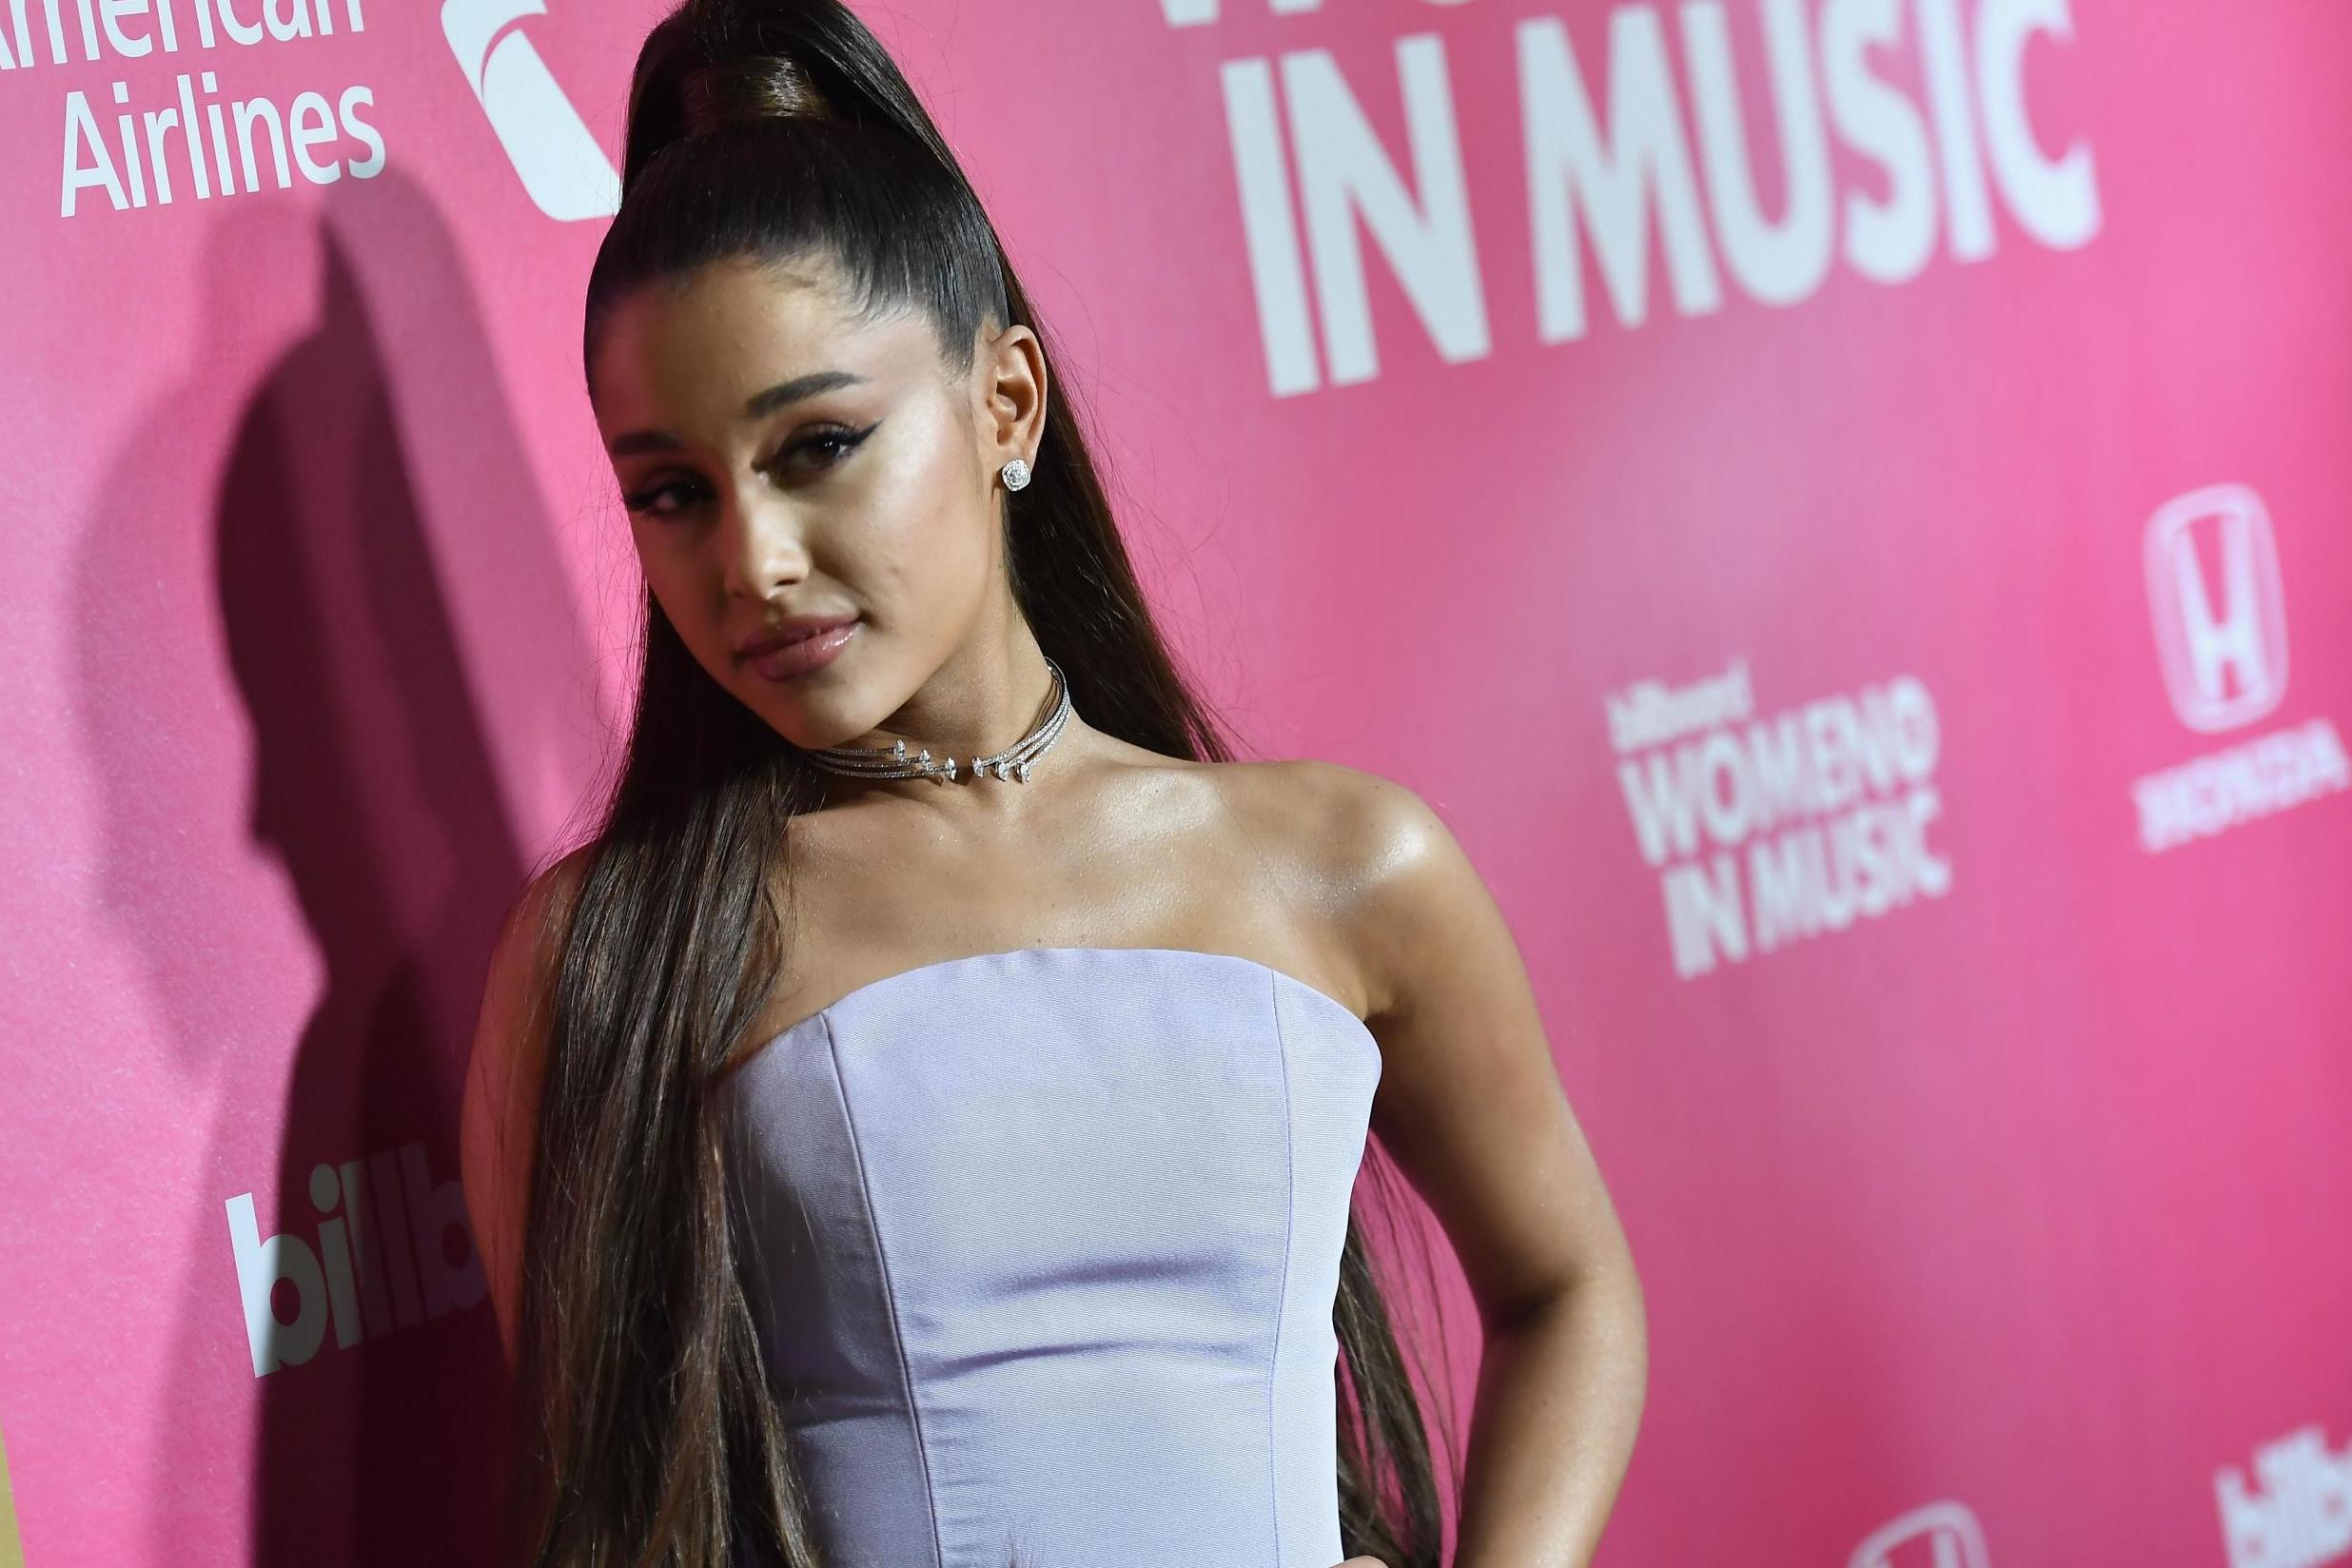 Ariana Grande attends Billboard's 13th Annual Women In Music event in New York City on 6 December, 2018.